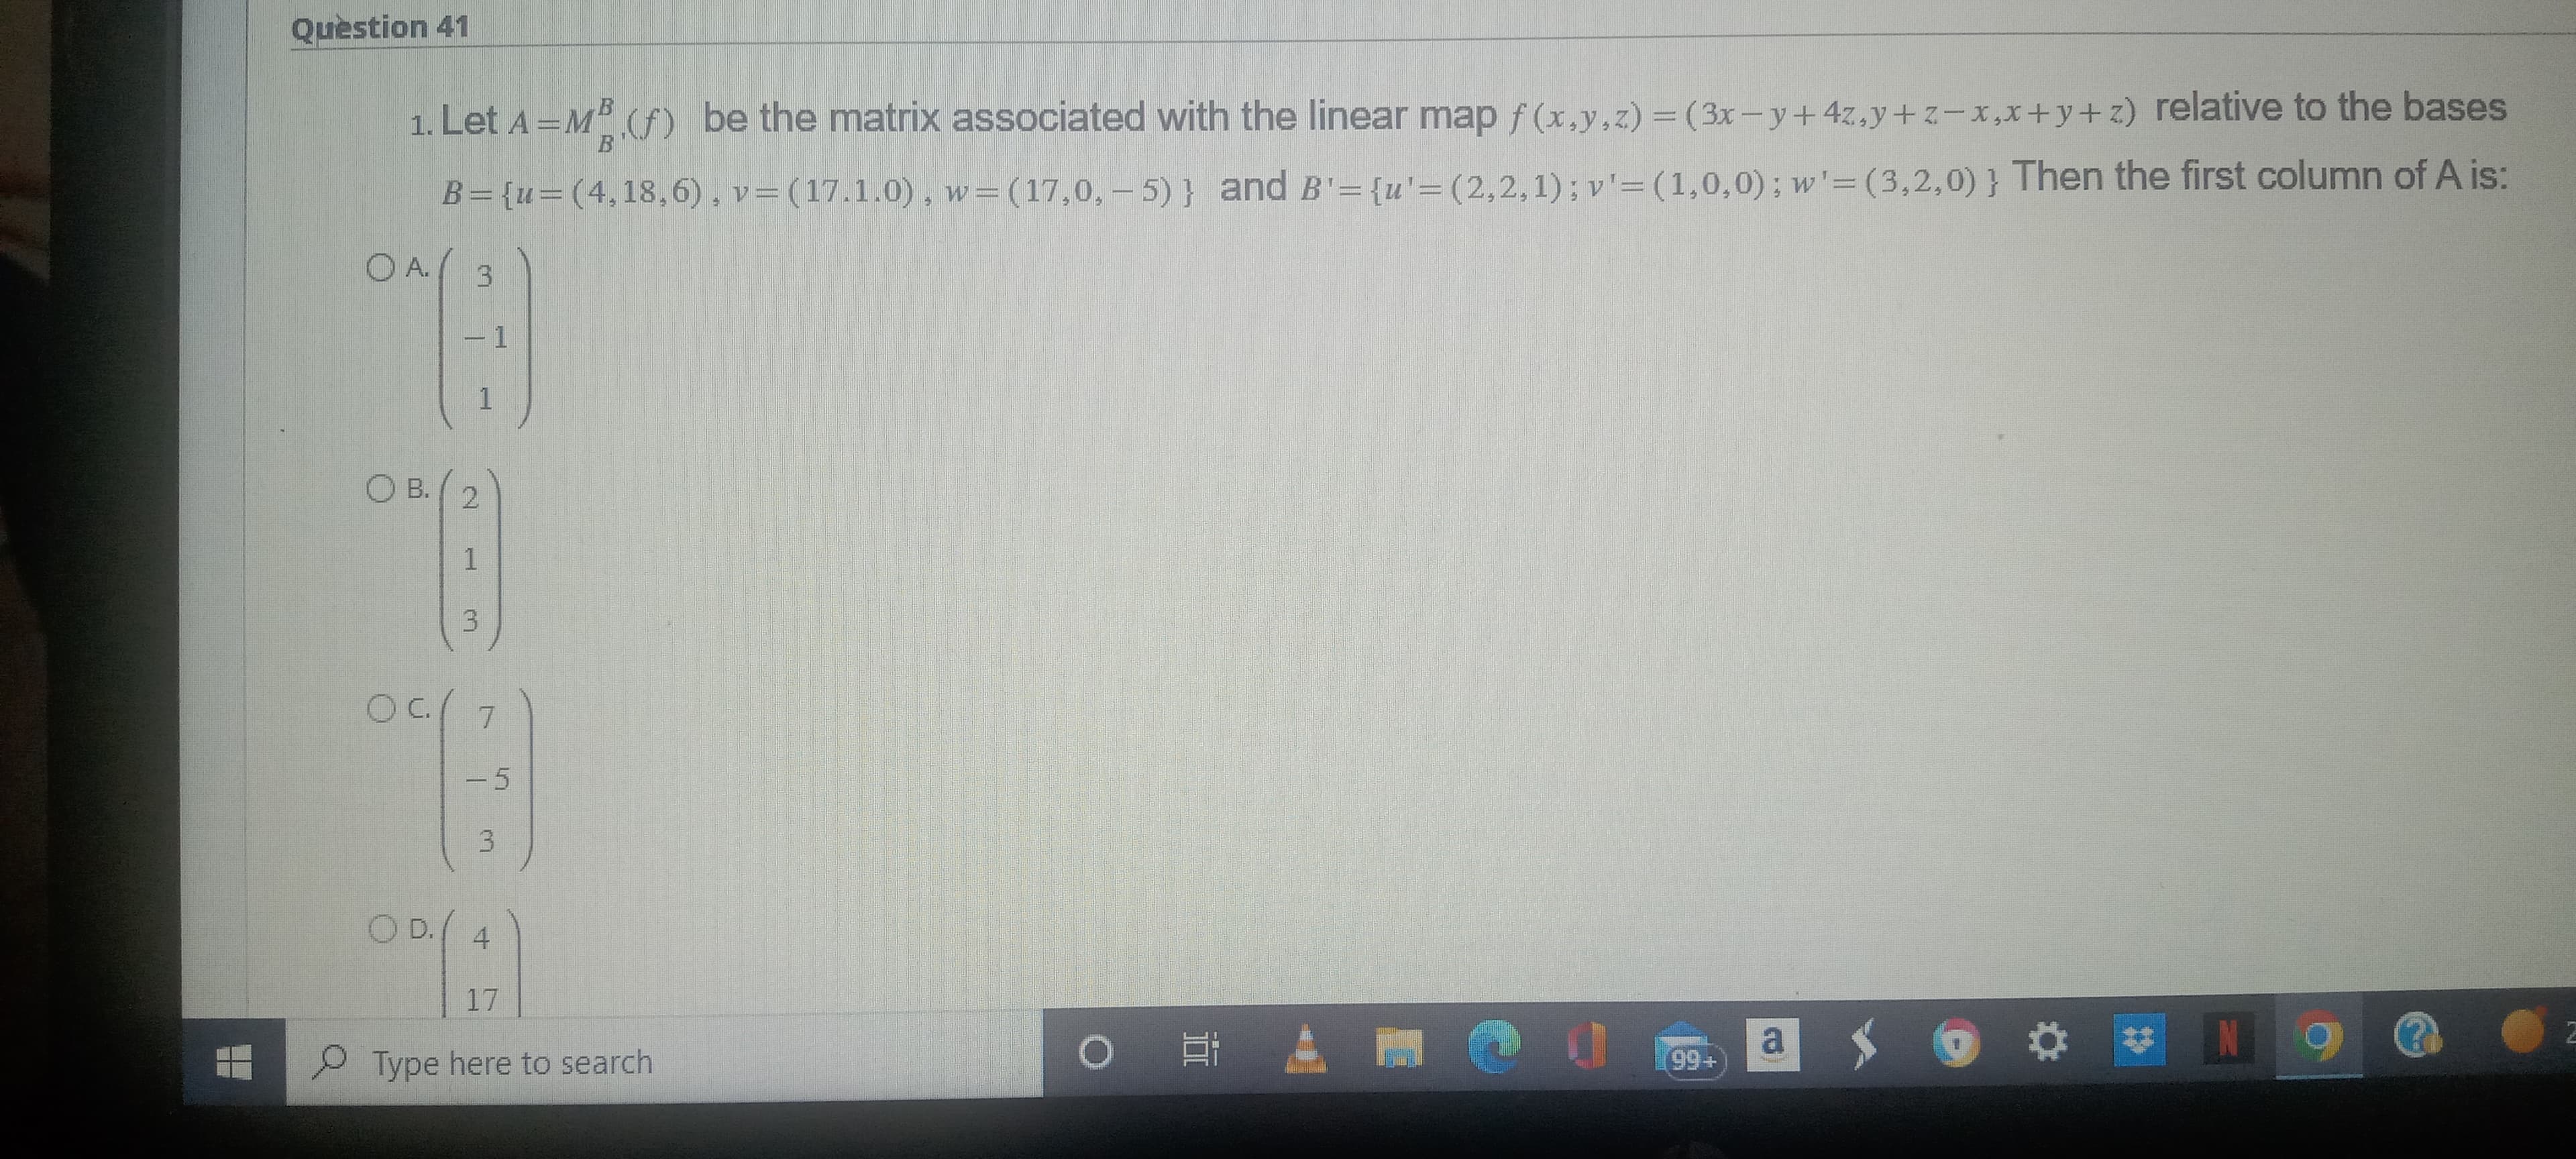 Question 41
1. Let A=MB (f) be the matrix associated with the linear map f(x,y,z) = (3x-y + 4z,y+z-x,x+y+z) relative to the bases
v= (17.1.0), w = (17,0,-5)} and B'= {u'=(2,2,1); v'= (1,0,0); w'=(3,2,0)} Then the first column of A is:
B={u=(4,18,6),
OA./
3
°B
1
1
2
B
1
3
09/7
O B.
3
O D.
4
°°A
17
Type here to search
O
O
0
(99+
a
- O
2